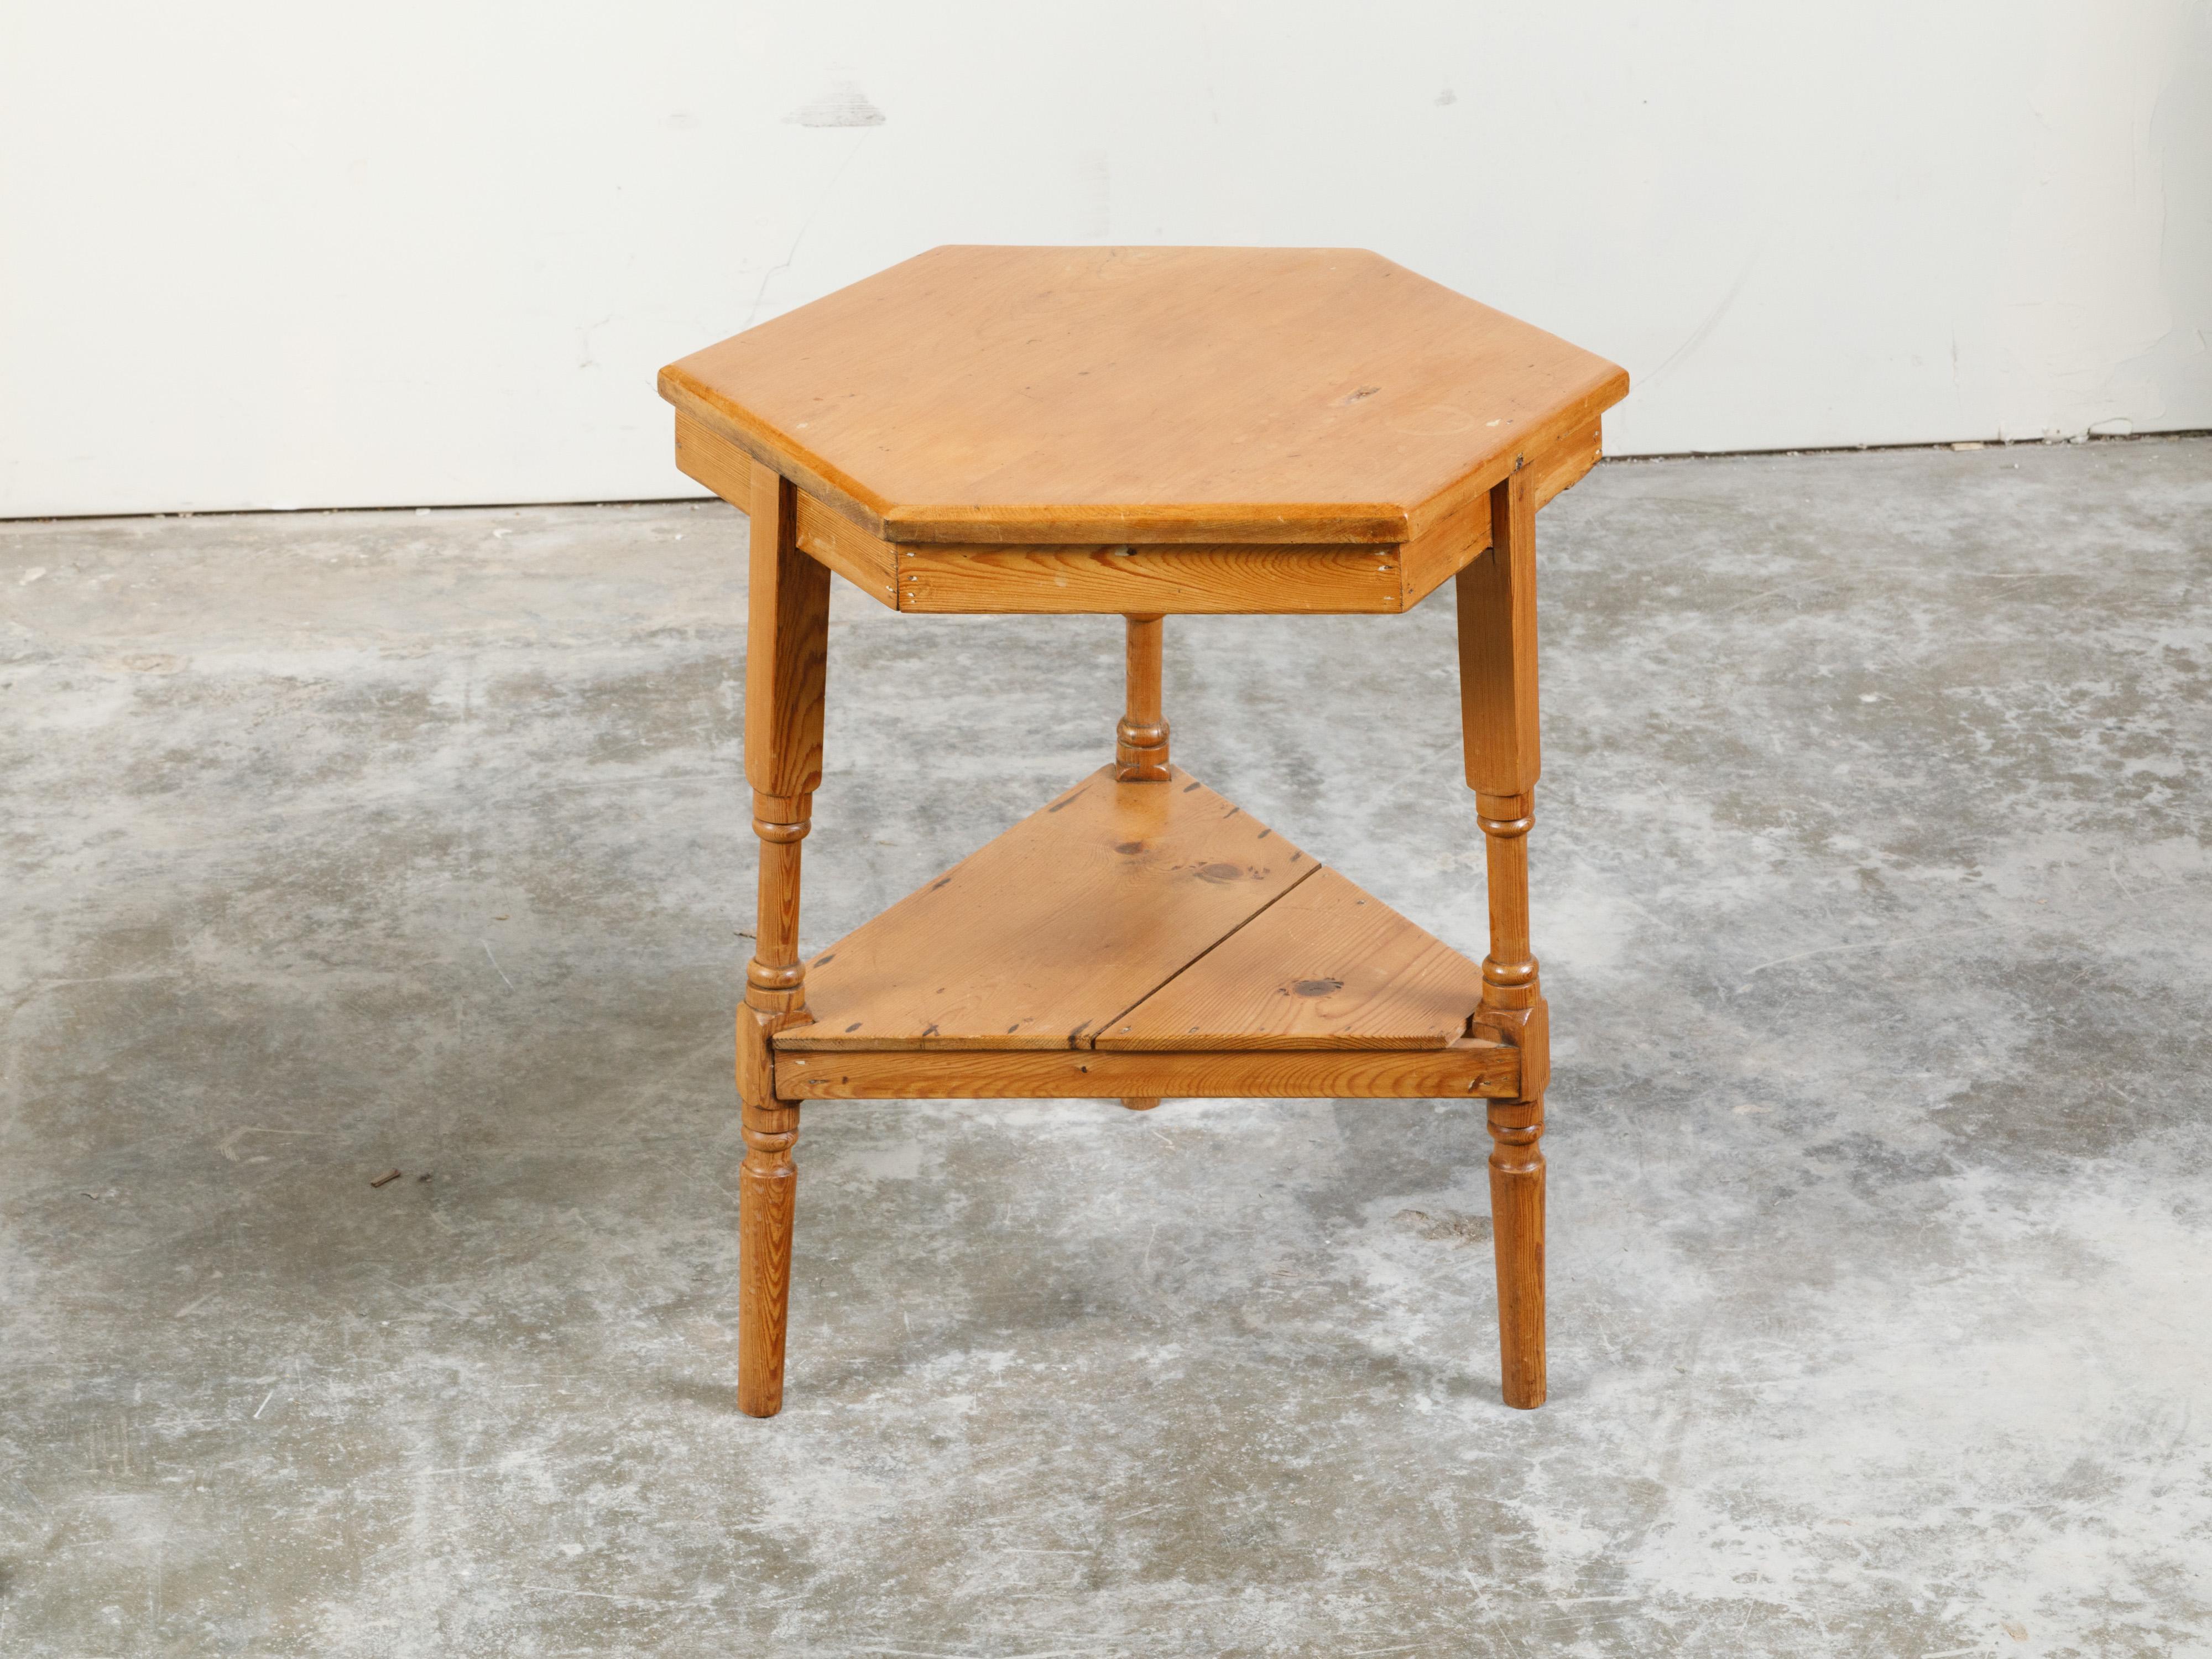 English Midcentury Pine Cricket Table with Hexagonal Top and Triangular Shelf In Good Condition For Sale In Atlanta, GA